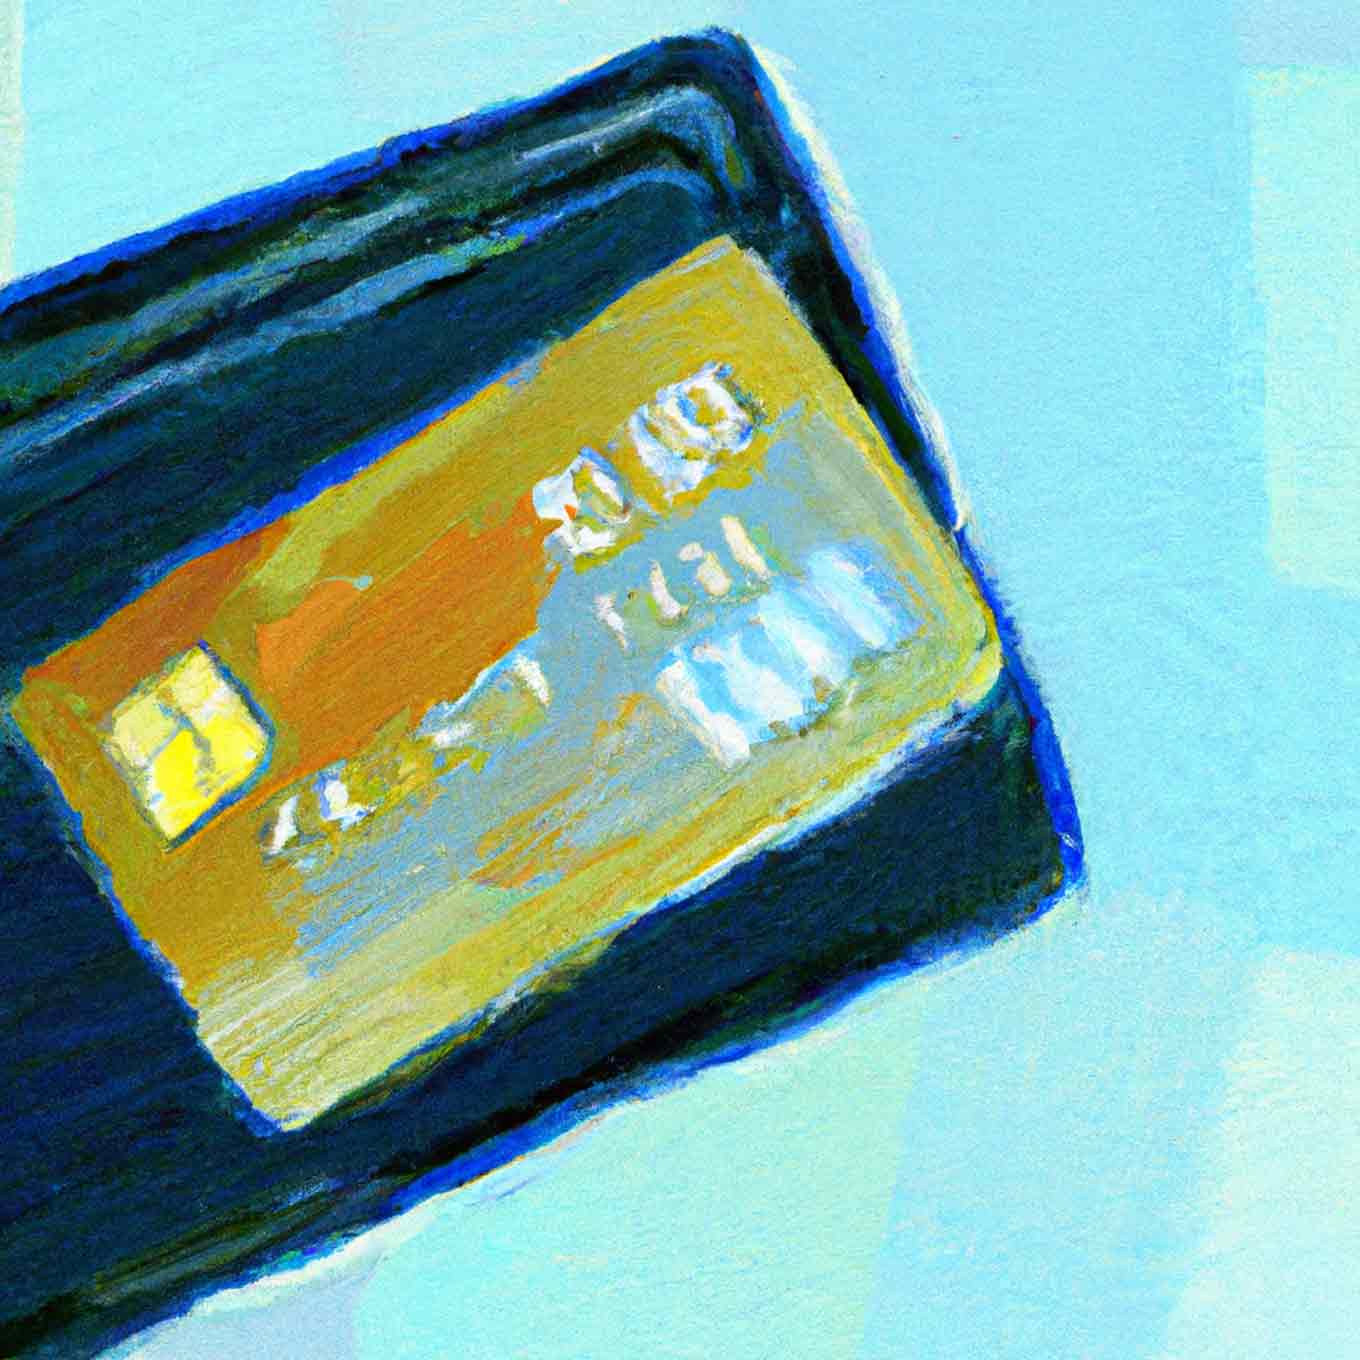 Abstract oil painting of a credit card